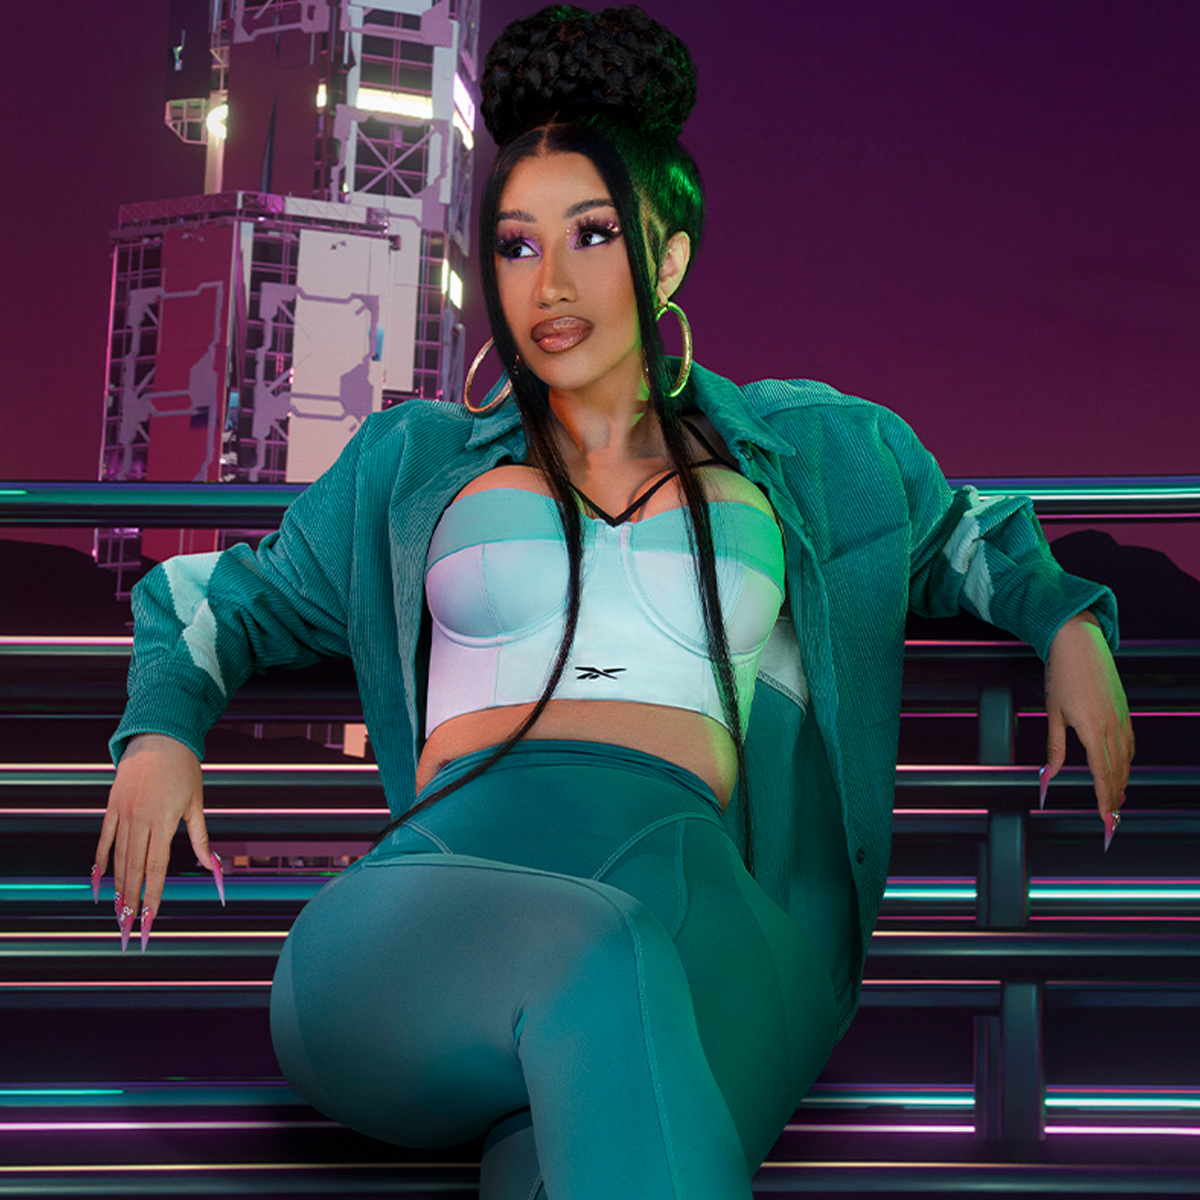 Cardi B's Reebok Collection Is a Reminder To Be True to Yourself